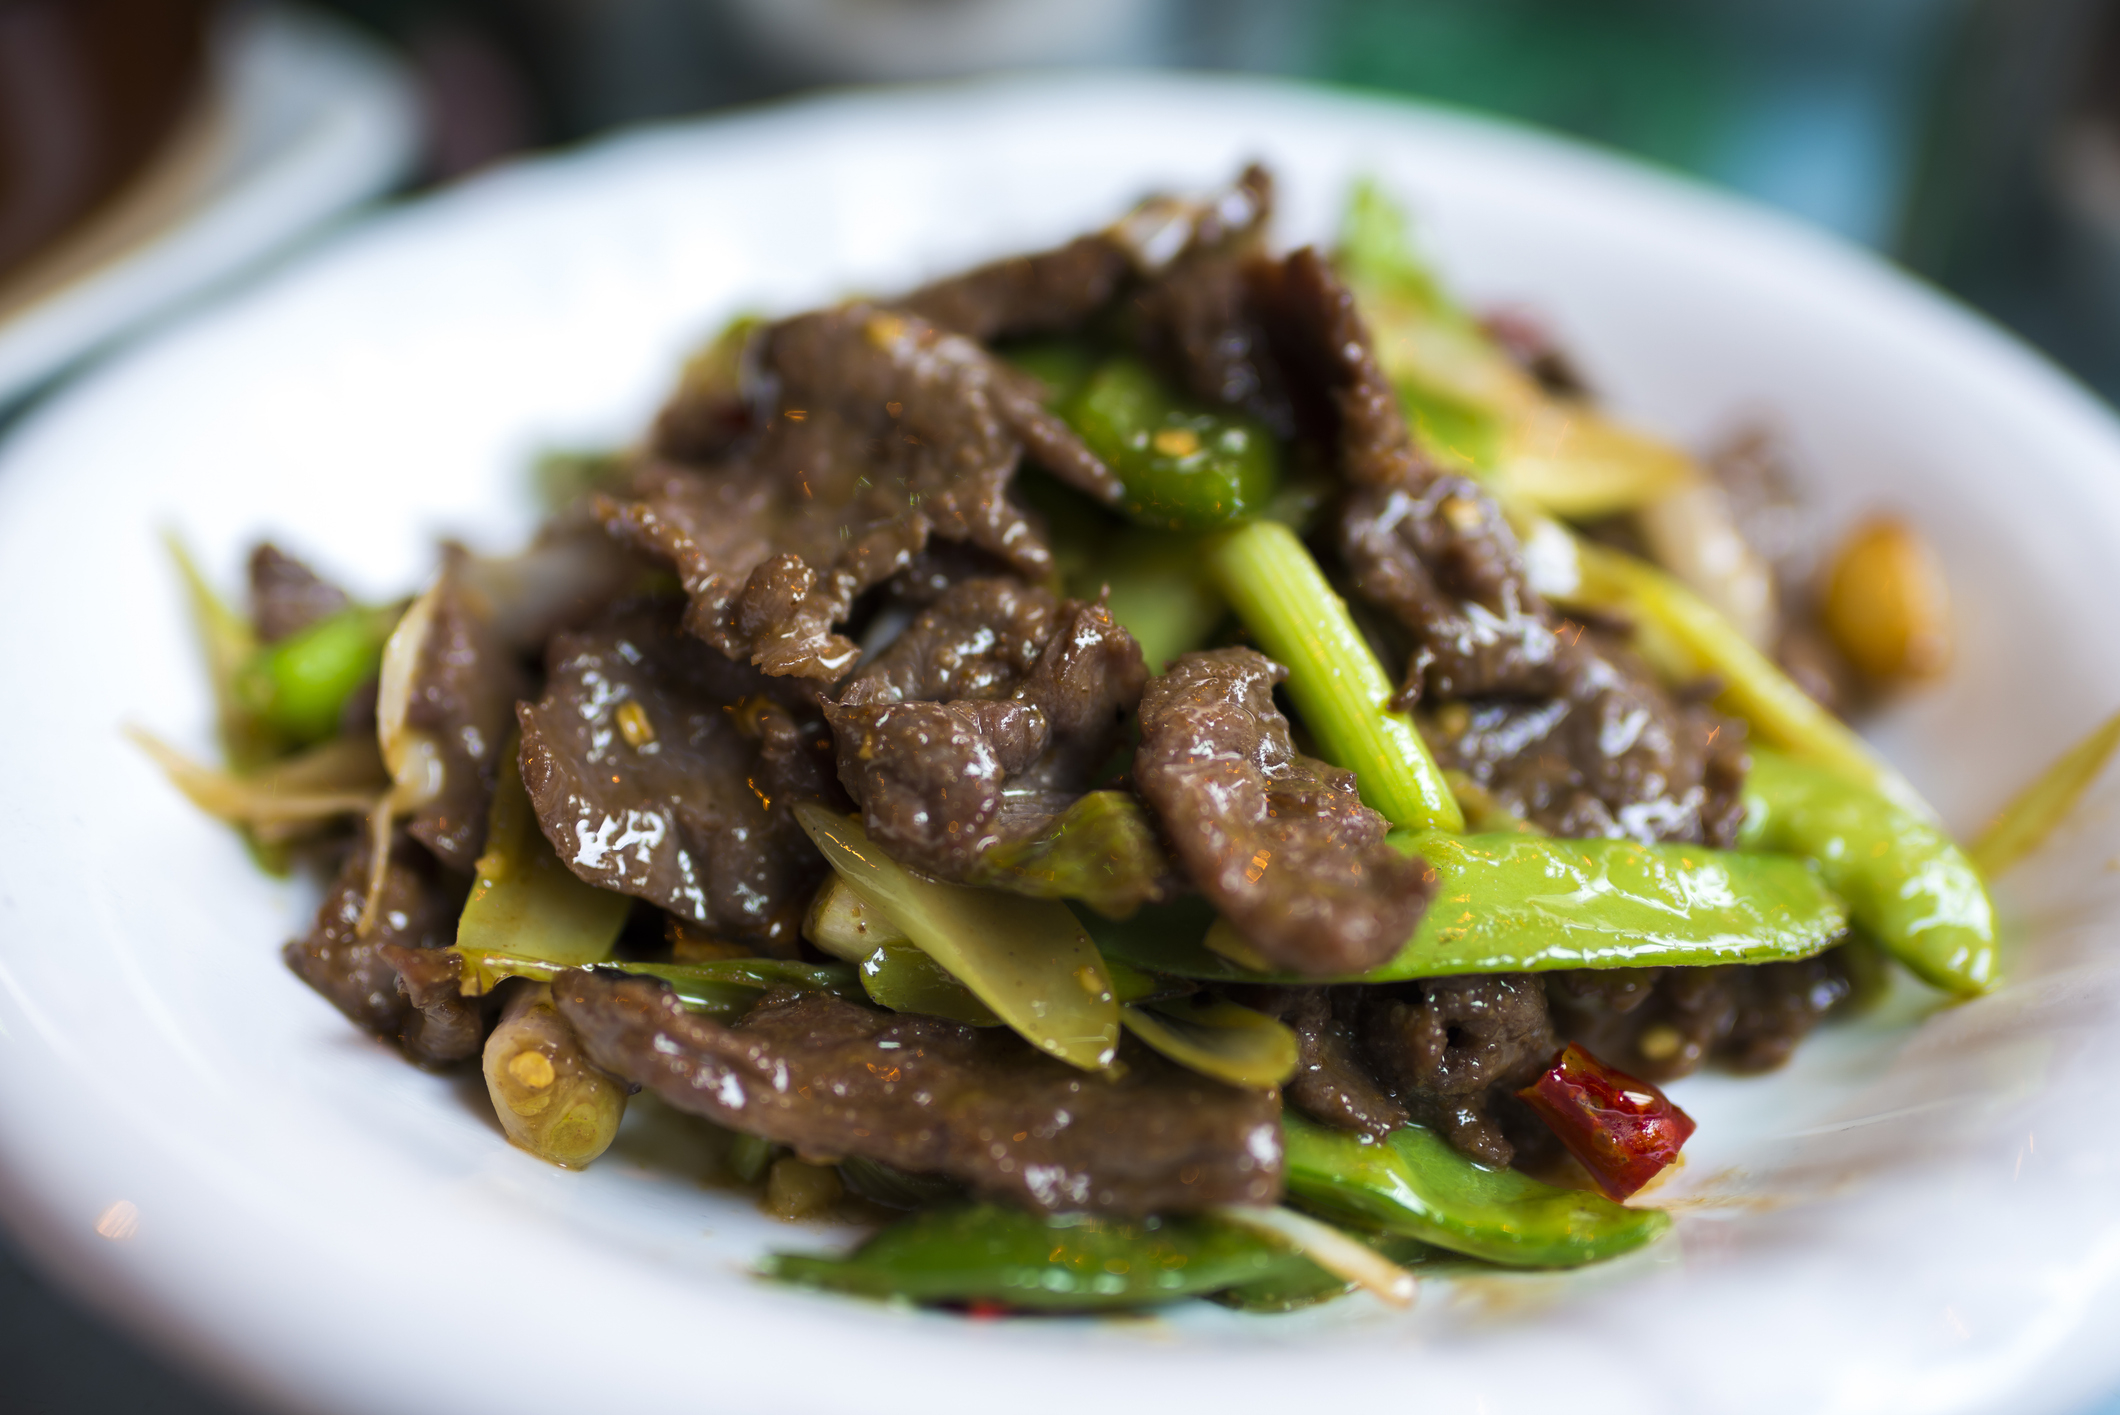 Plate of stir-fried beef with snap peas and vegetables